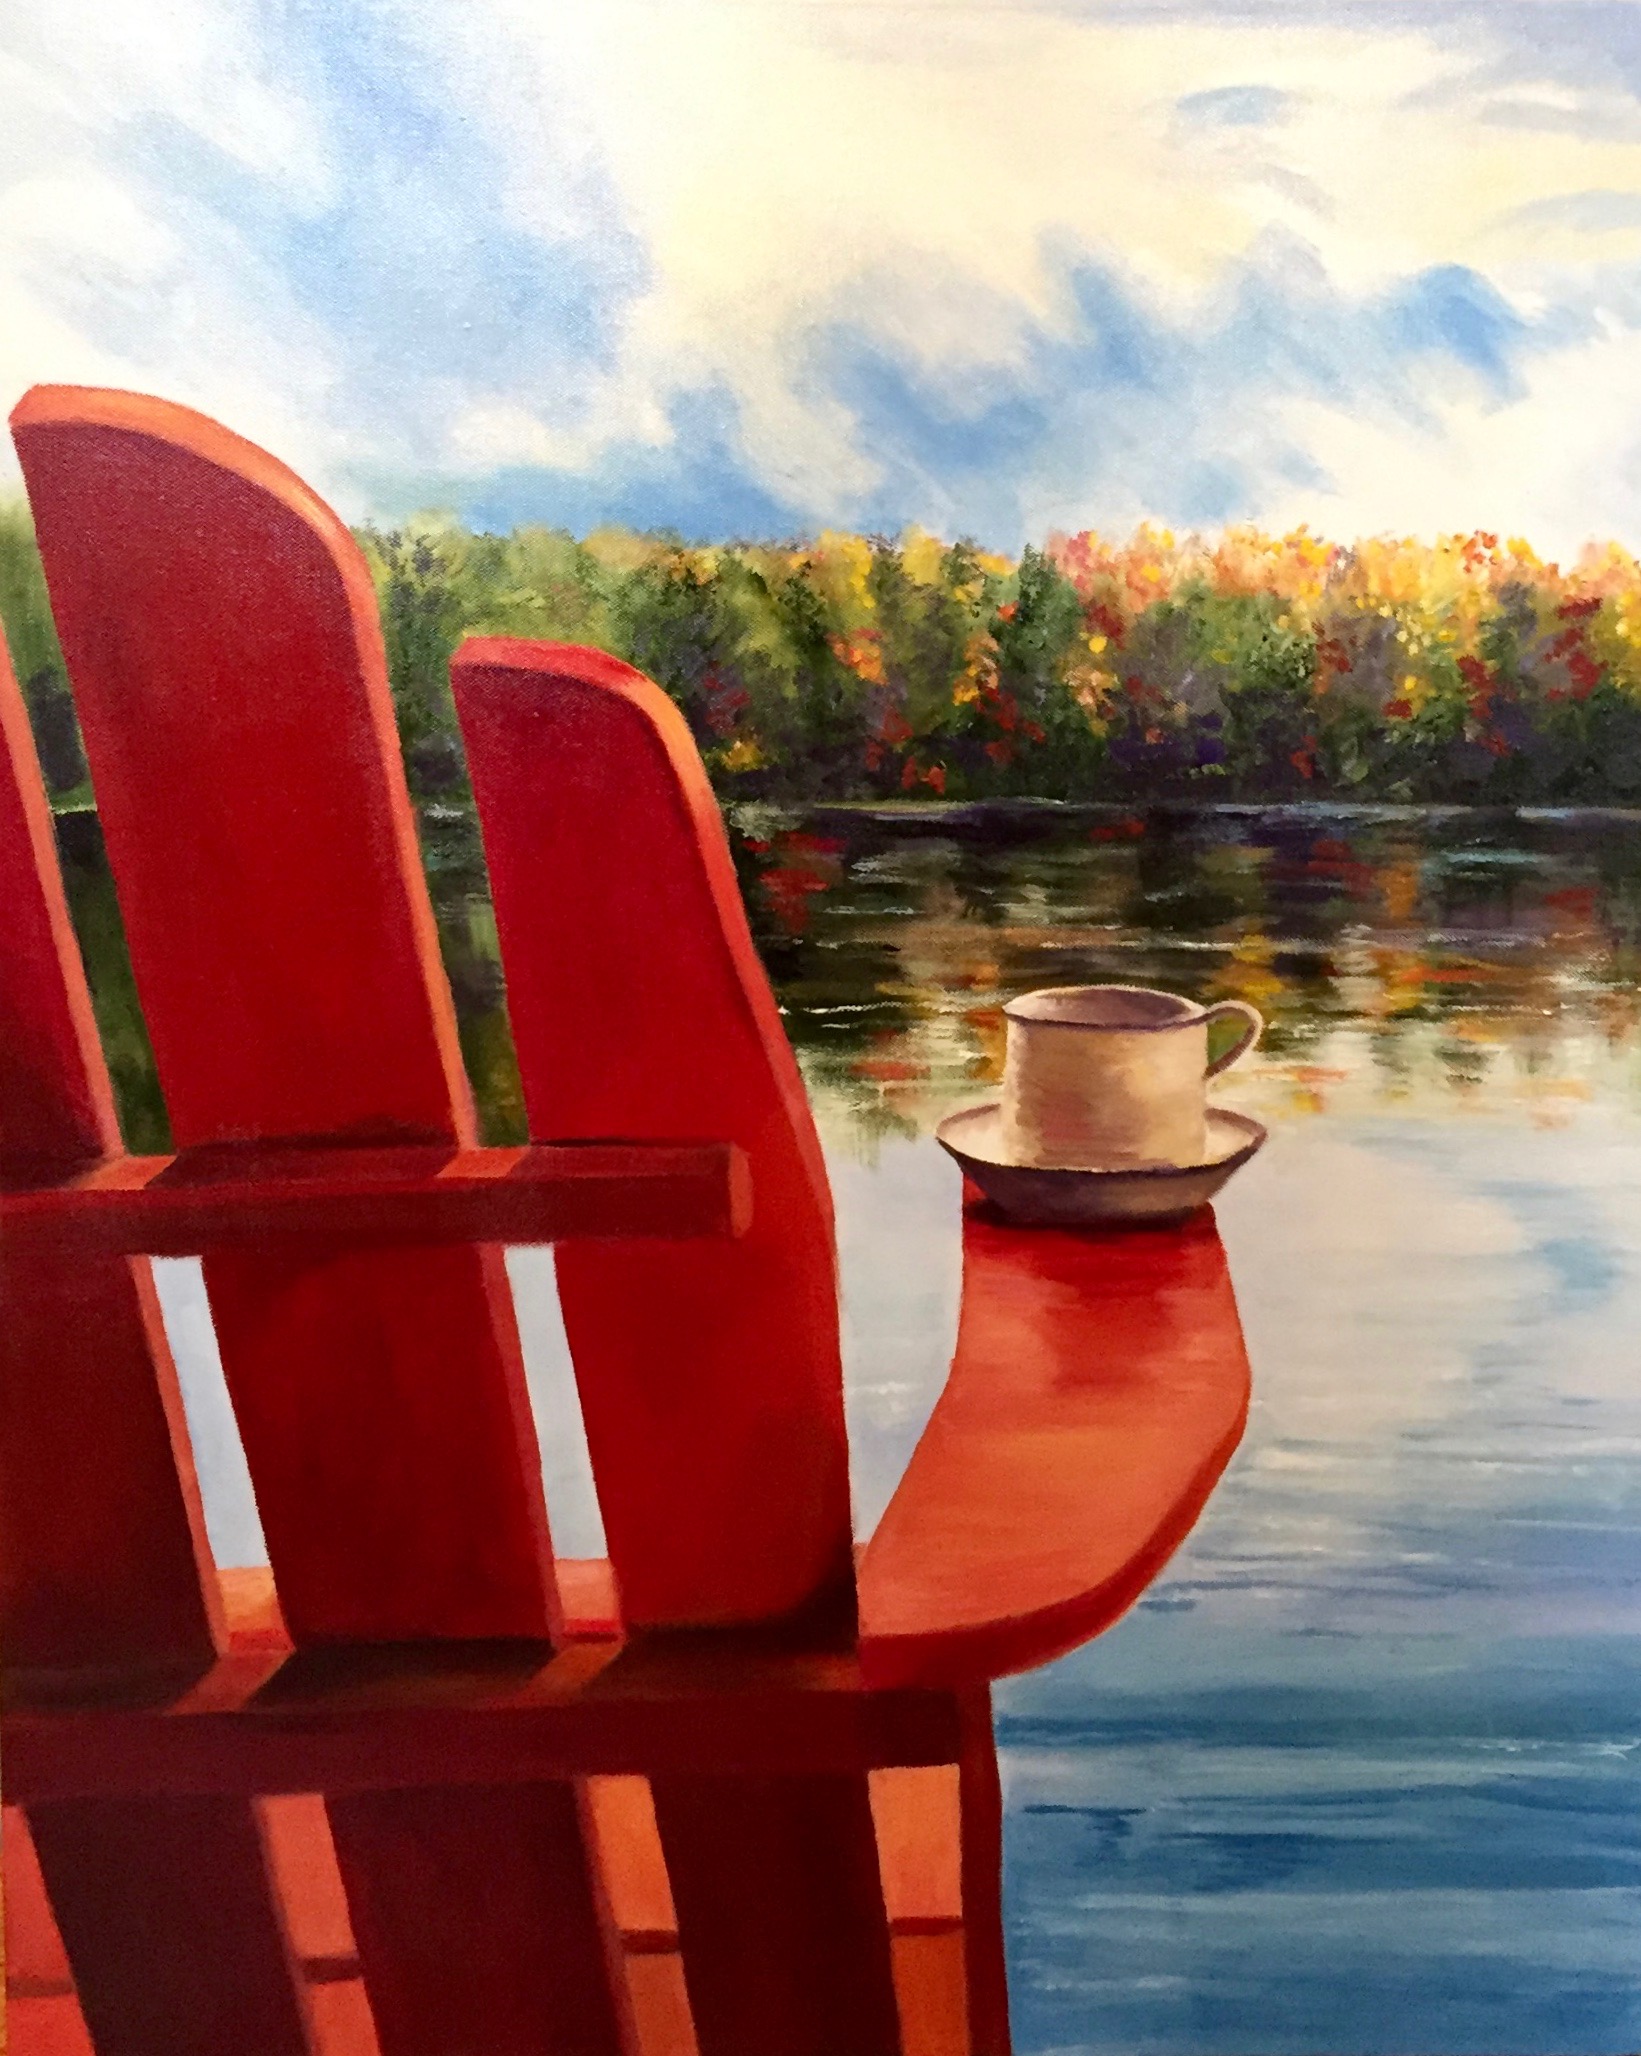 Adirondack chair facing the water, with a cup balanced on its arm.